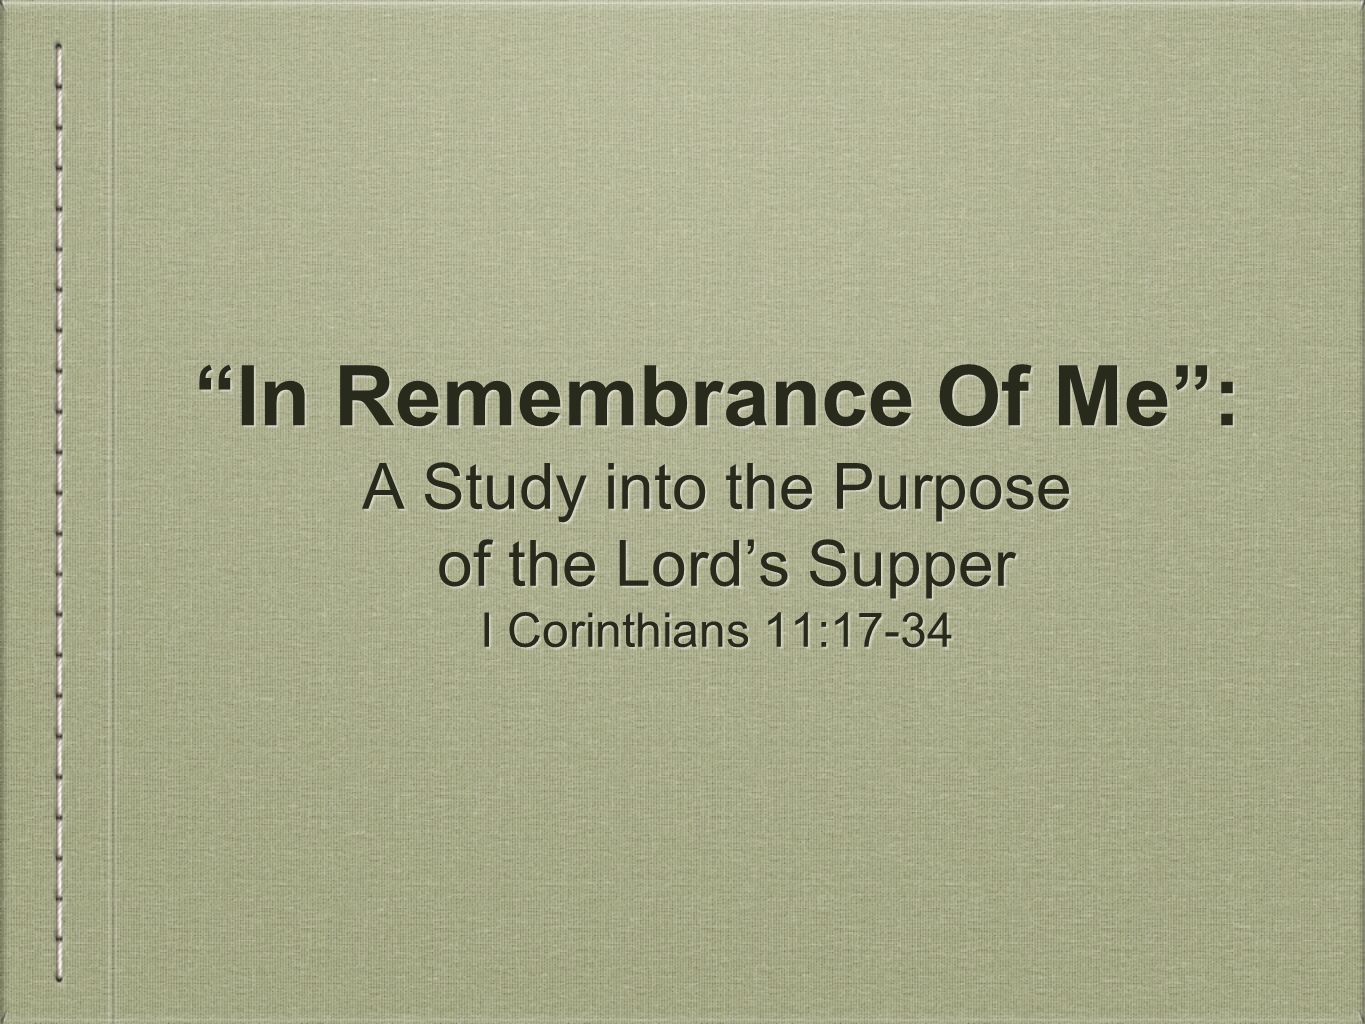 In Remembrance Of Me : A Study into the Purpose of the Lord’s Supper I Corinthians 11:17-34 A Study into the Purpose of the Lord’s Supper I Corinthians 11:17-34